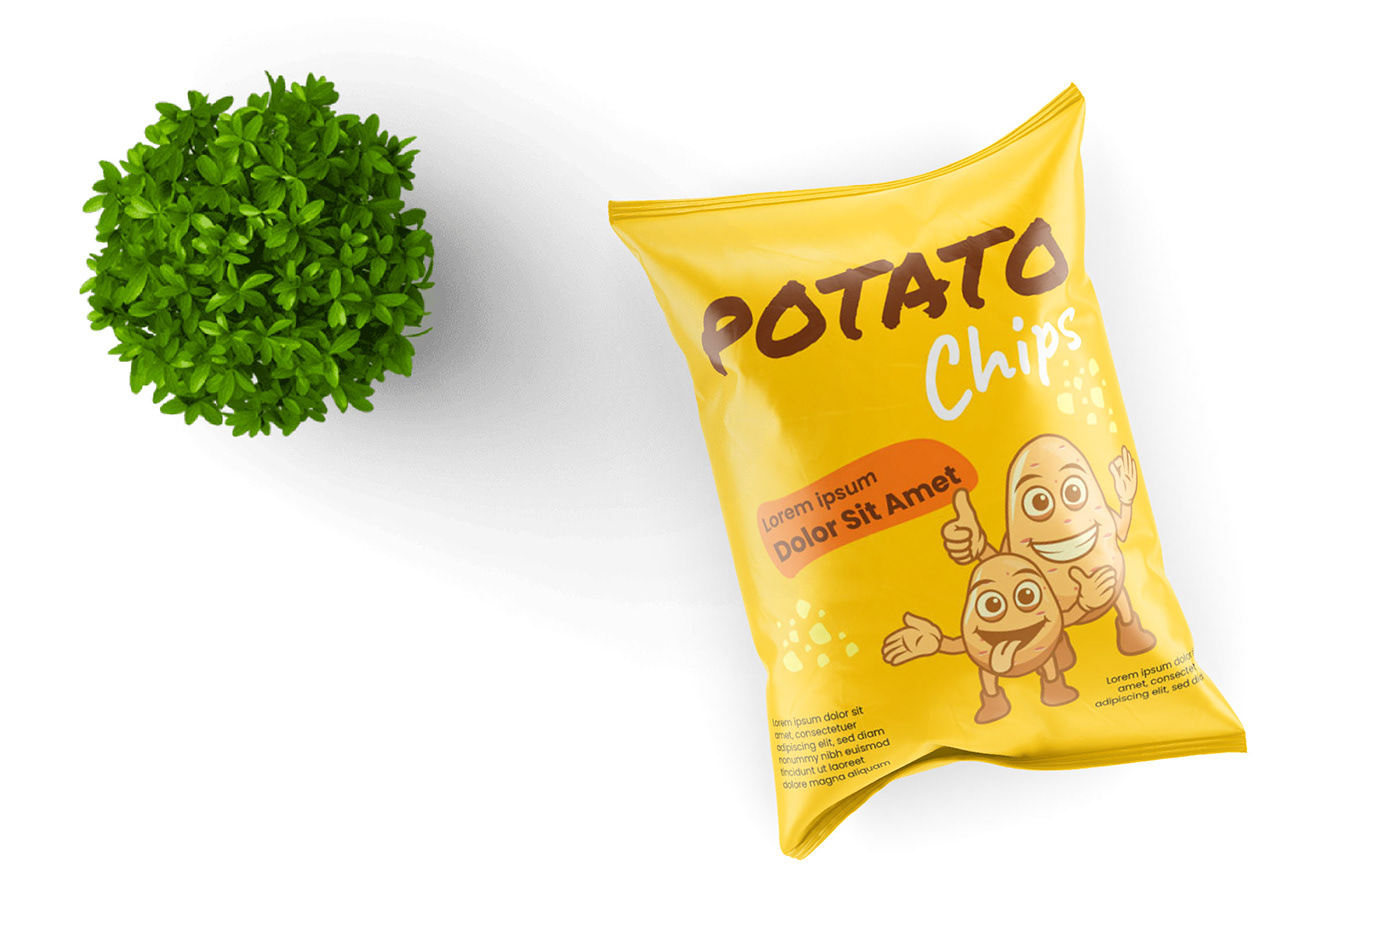 animation  art cartoon character Character design  Design Graphic digital graphic template packaging illustration potato chips product design 